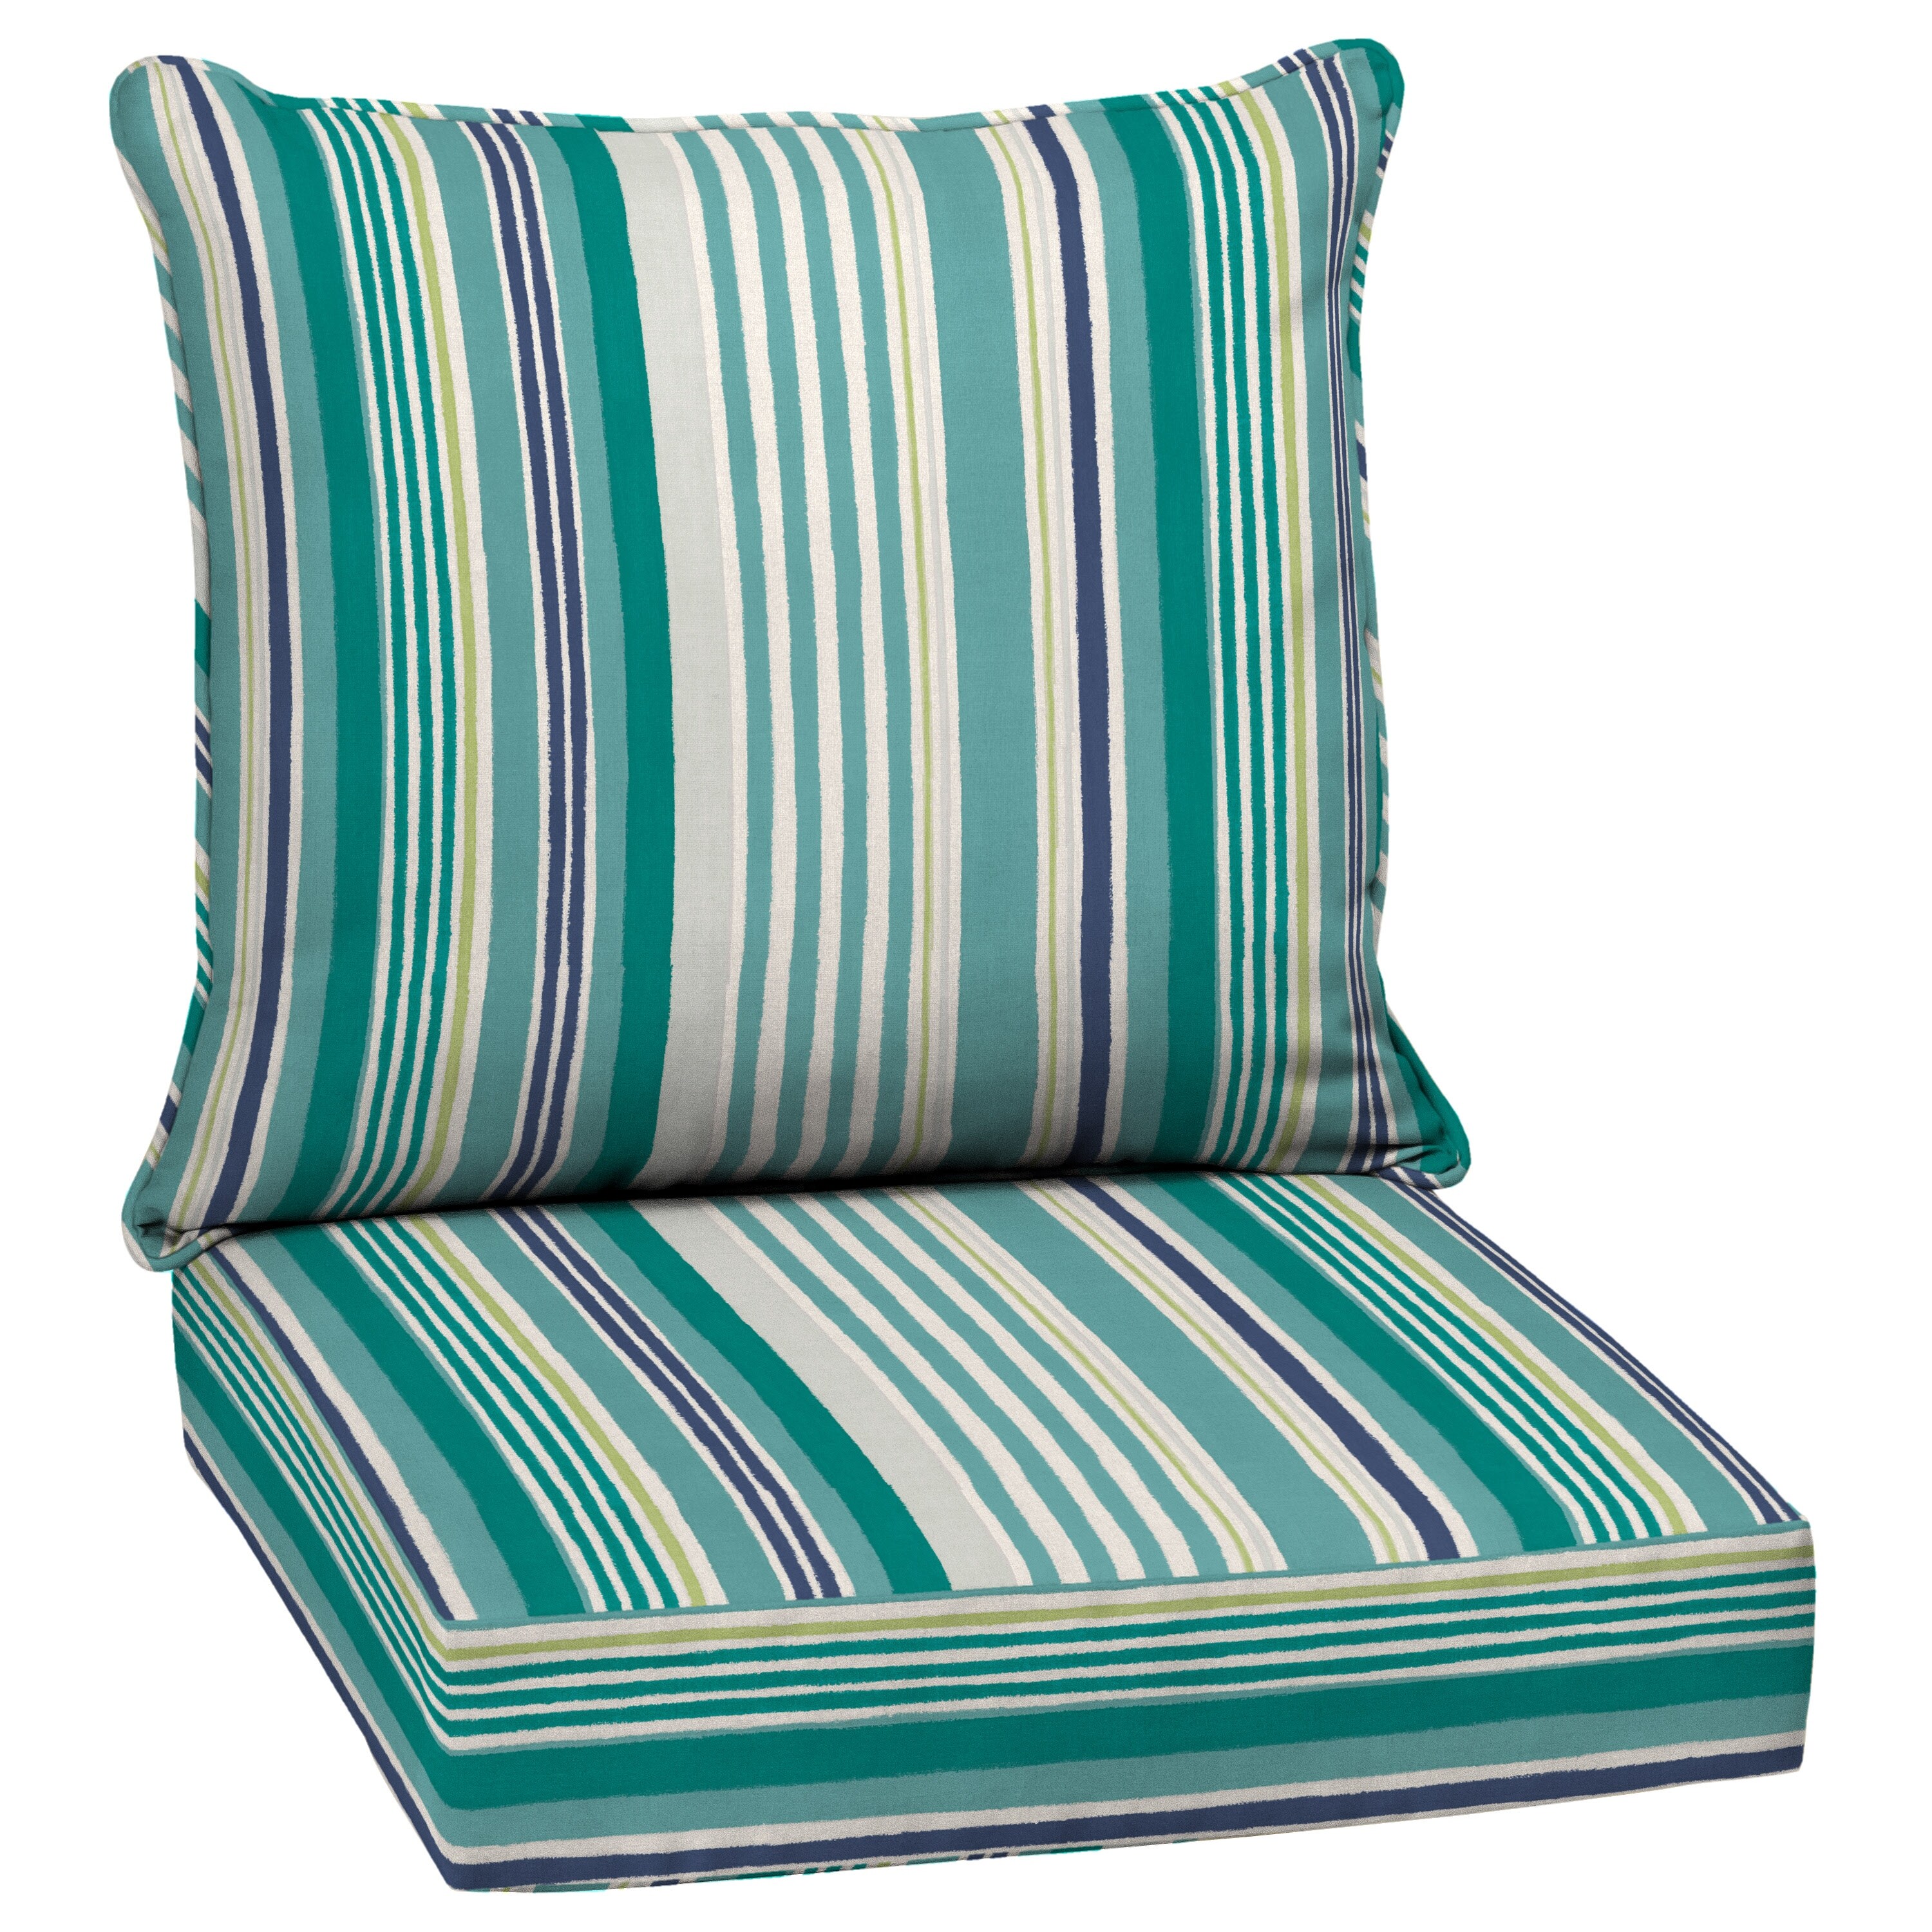 https://ak1.ostkcdn.com/images/products/is/images/direct/4847bef21ff04edef5329d555cee67865242007f/Arden-Selections-Outdoor-Deep-Seating-Cushion-Set-24-x-24.jpg